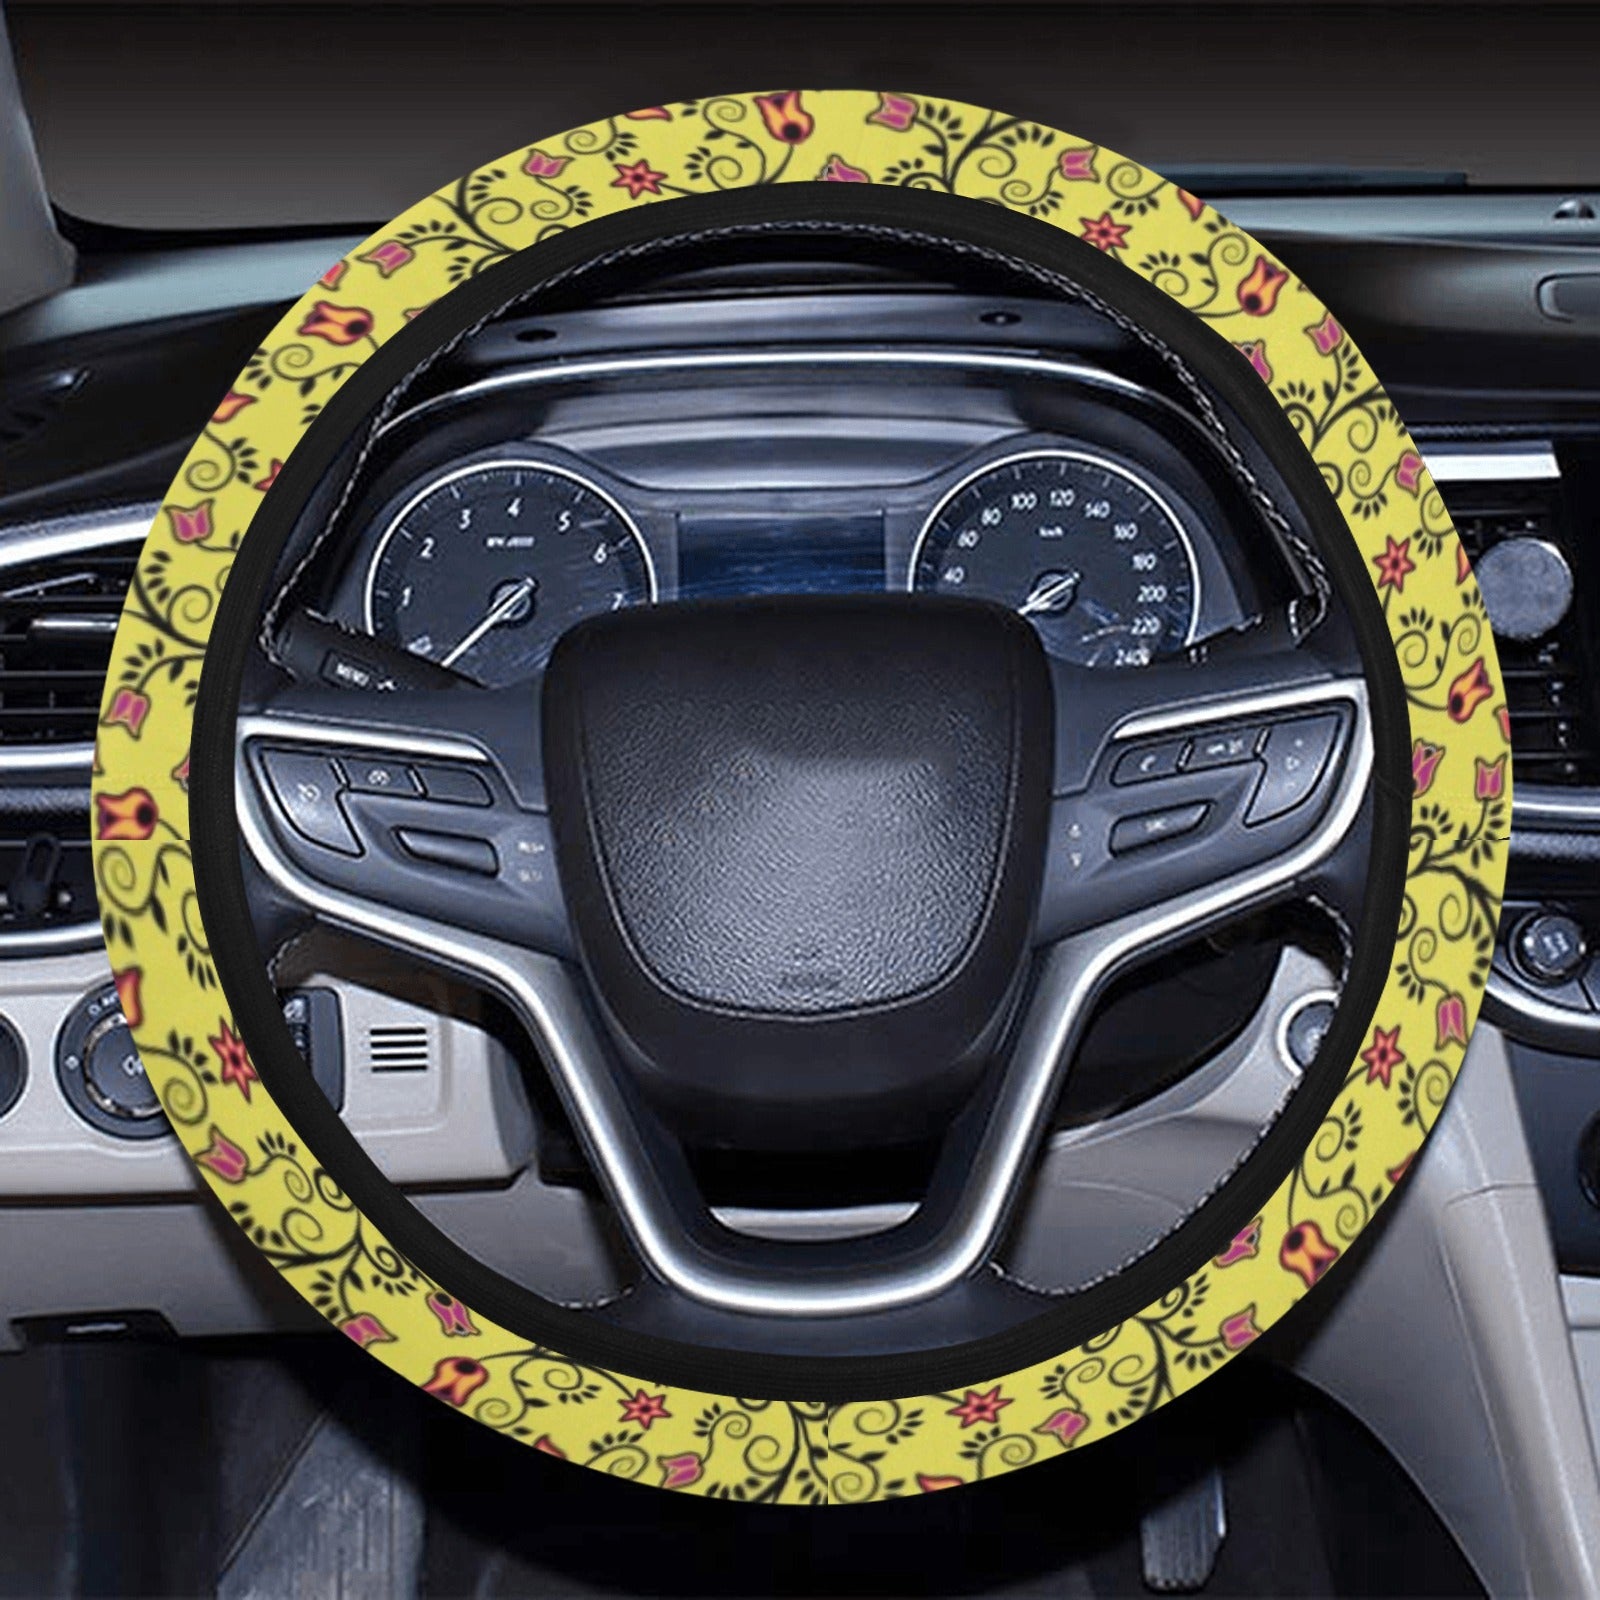 Key Lime Star Steering Wheel Cover with Elastic Edge Steering Wheel Cover with Elastic Edge e-joyer 